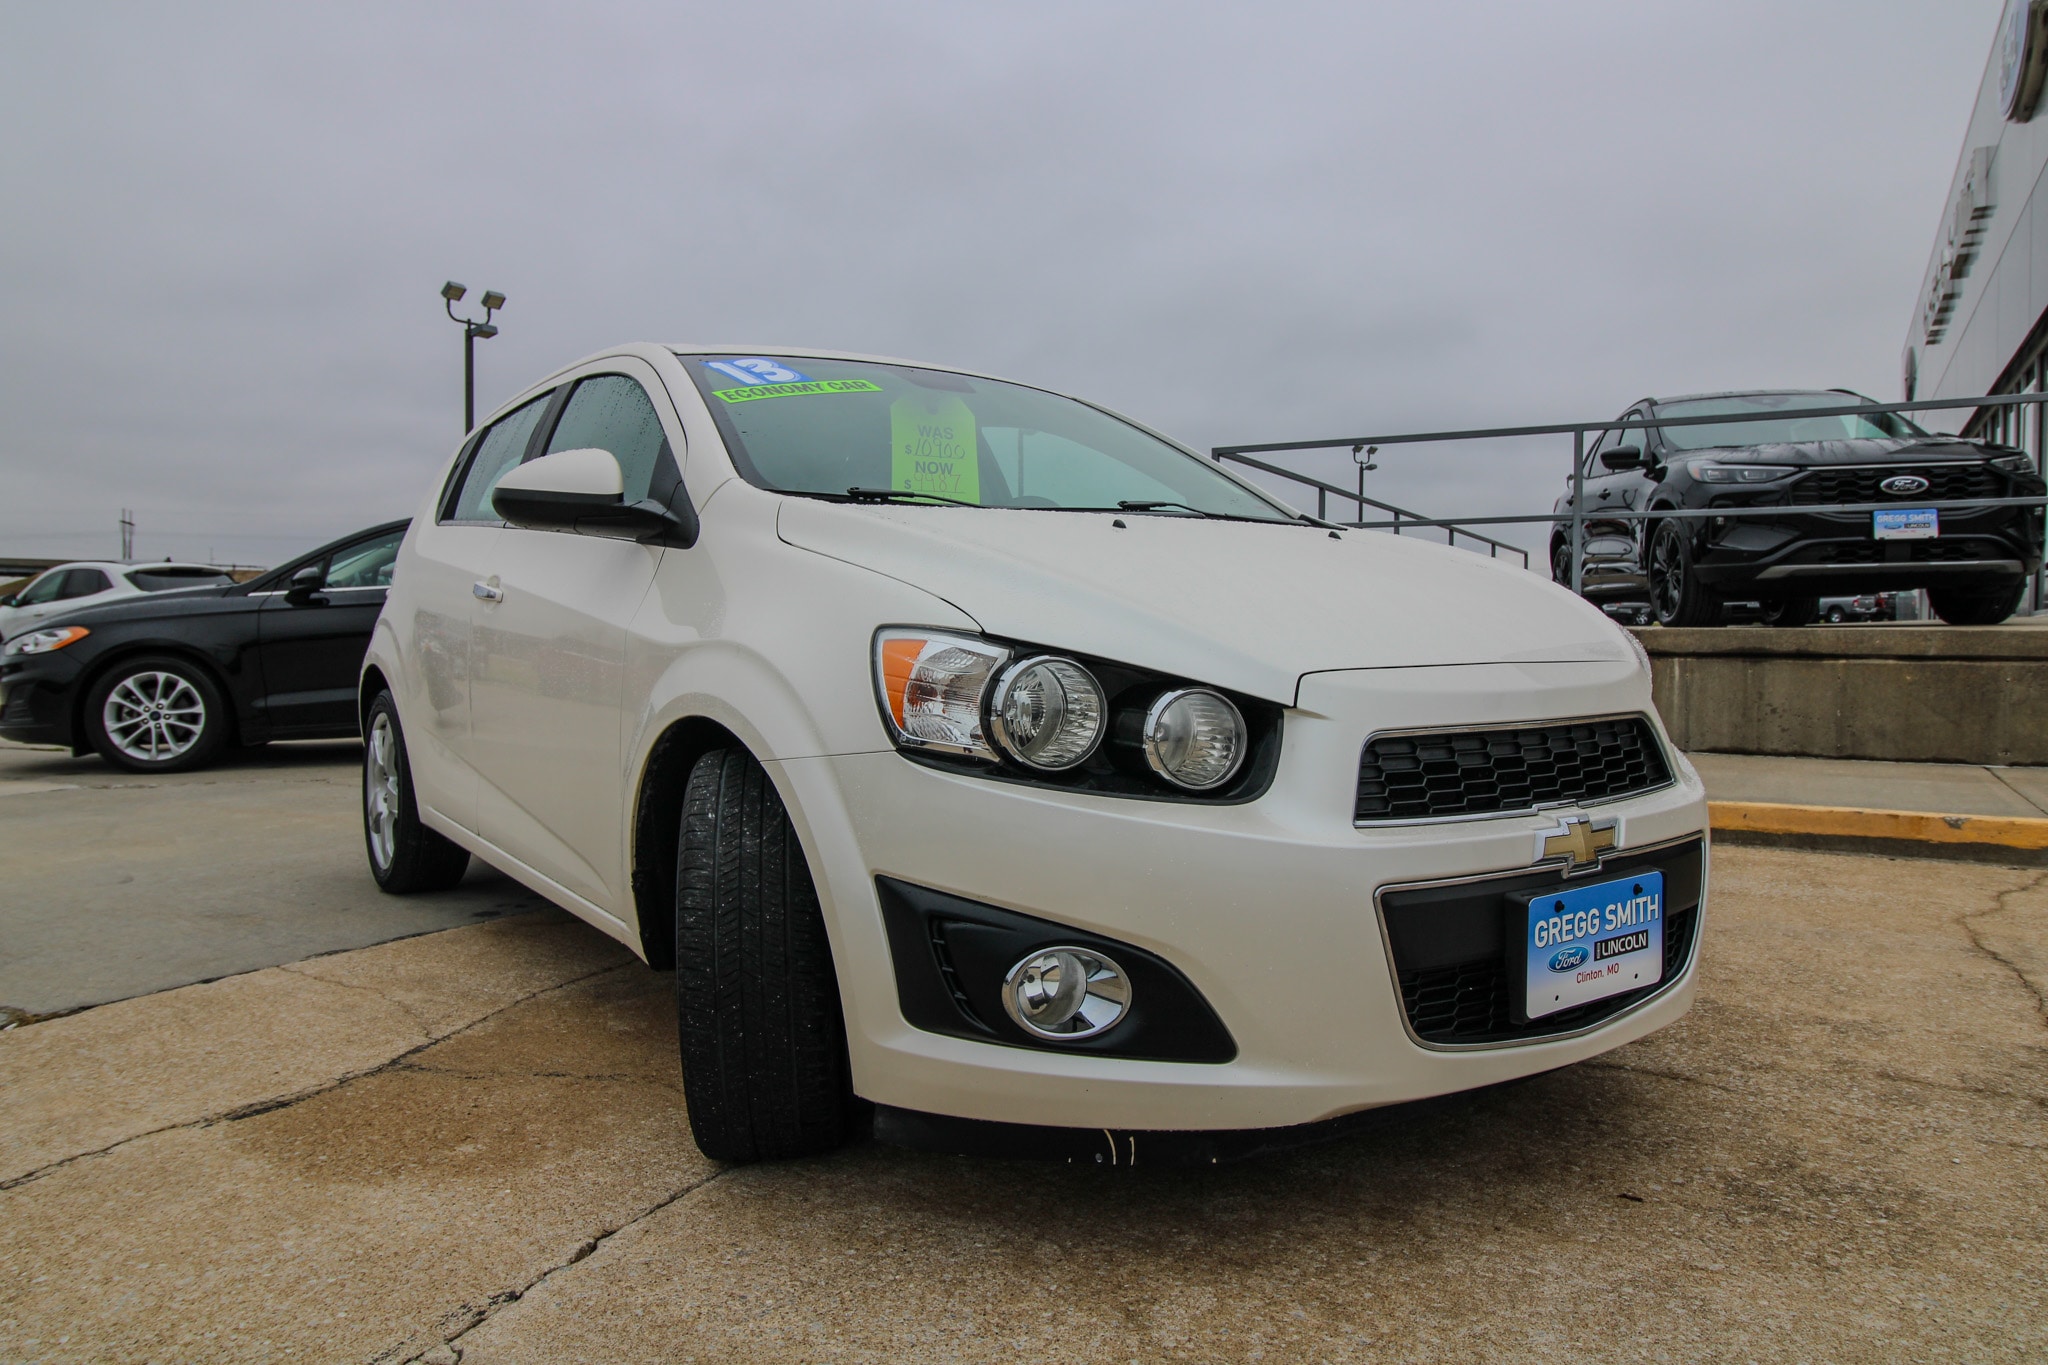 Used 2013 Chevrolet Sonic LTZ with VIN 1G1JE6SB9D4238573 for sale in Clinton, MO